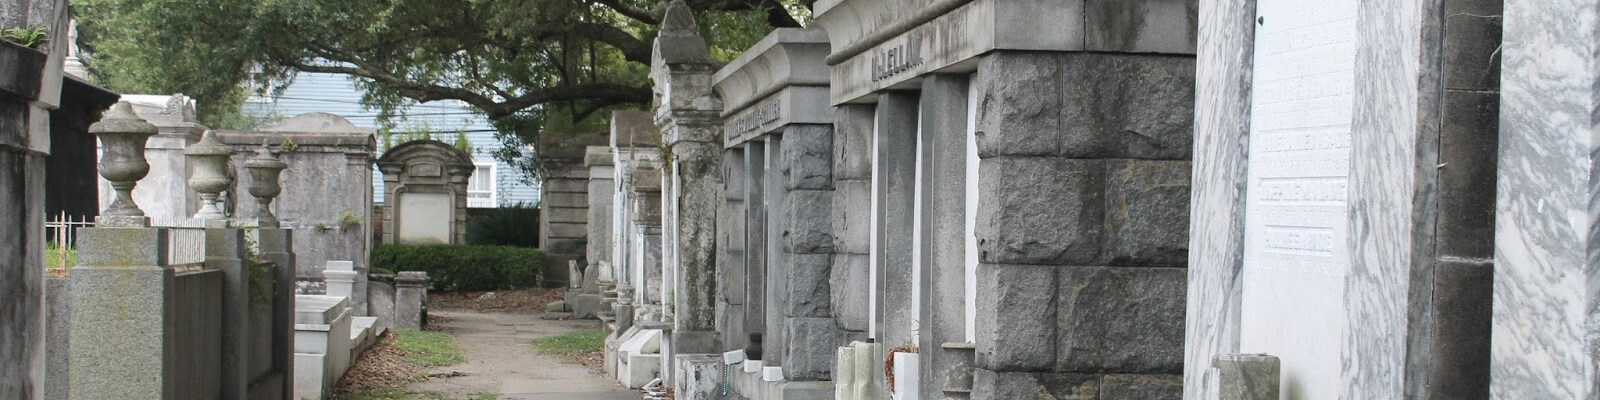 New Orleans Cemetery Voodoo Tour Coupons